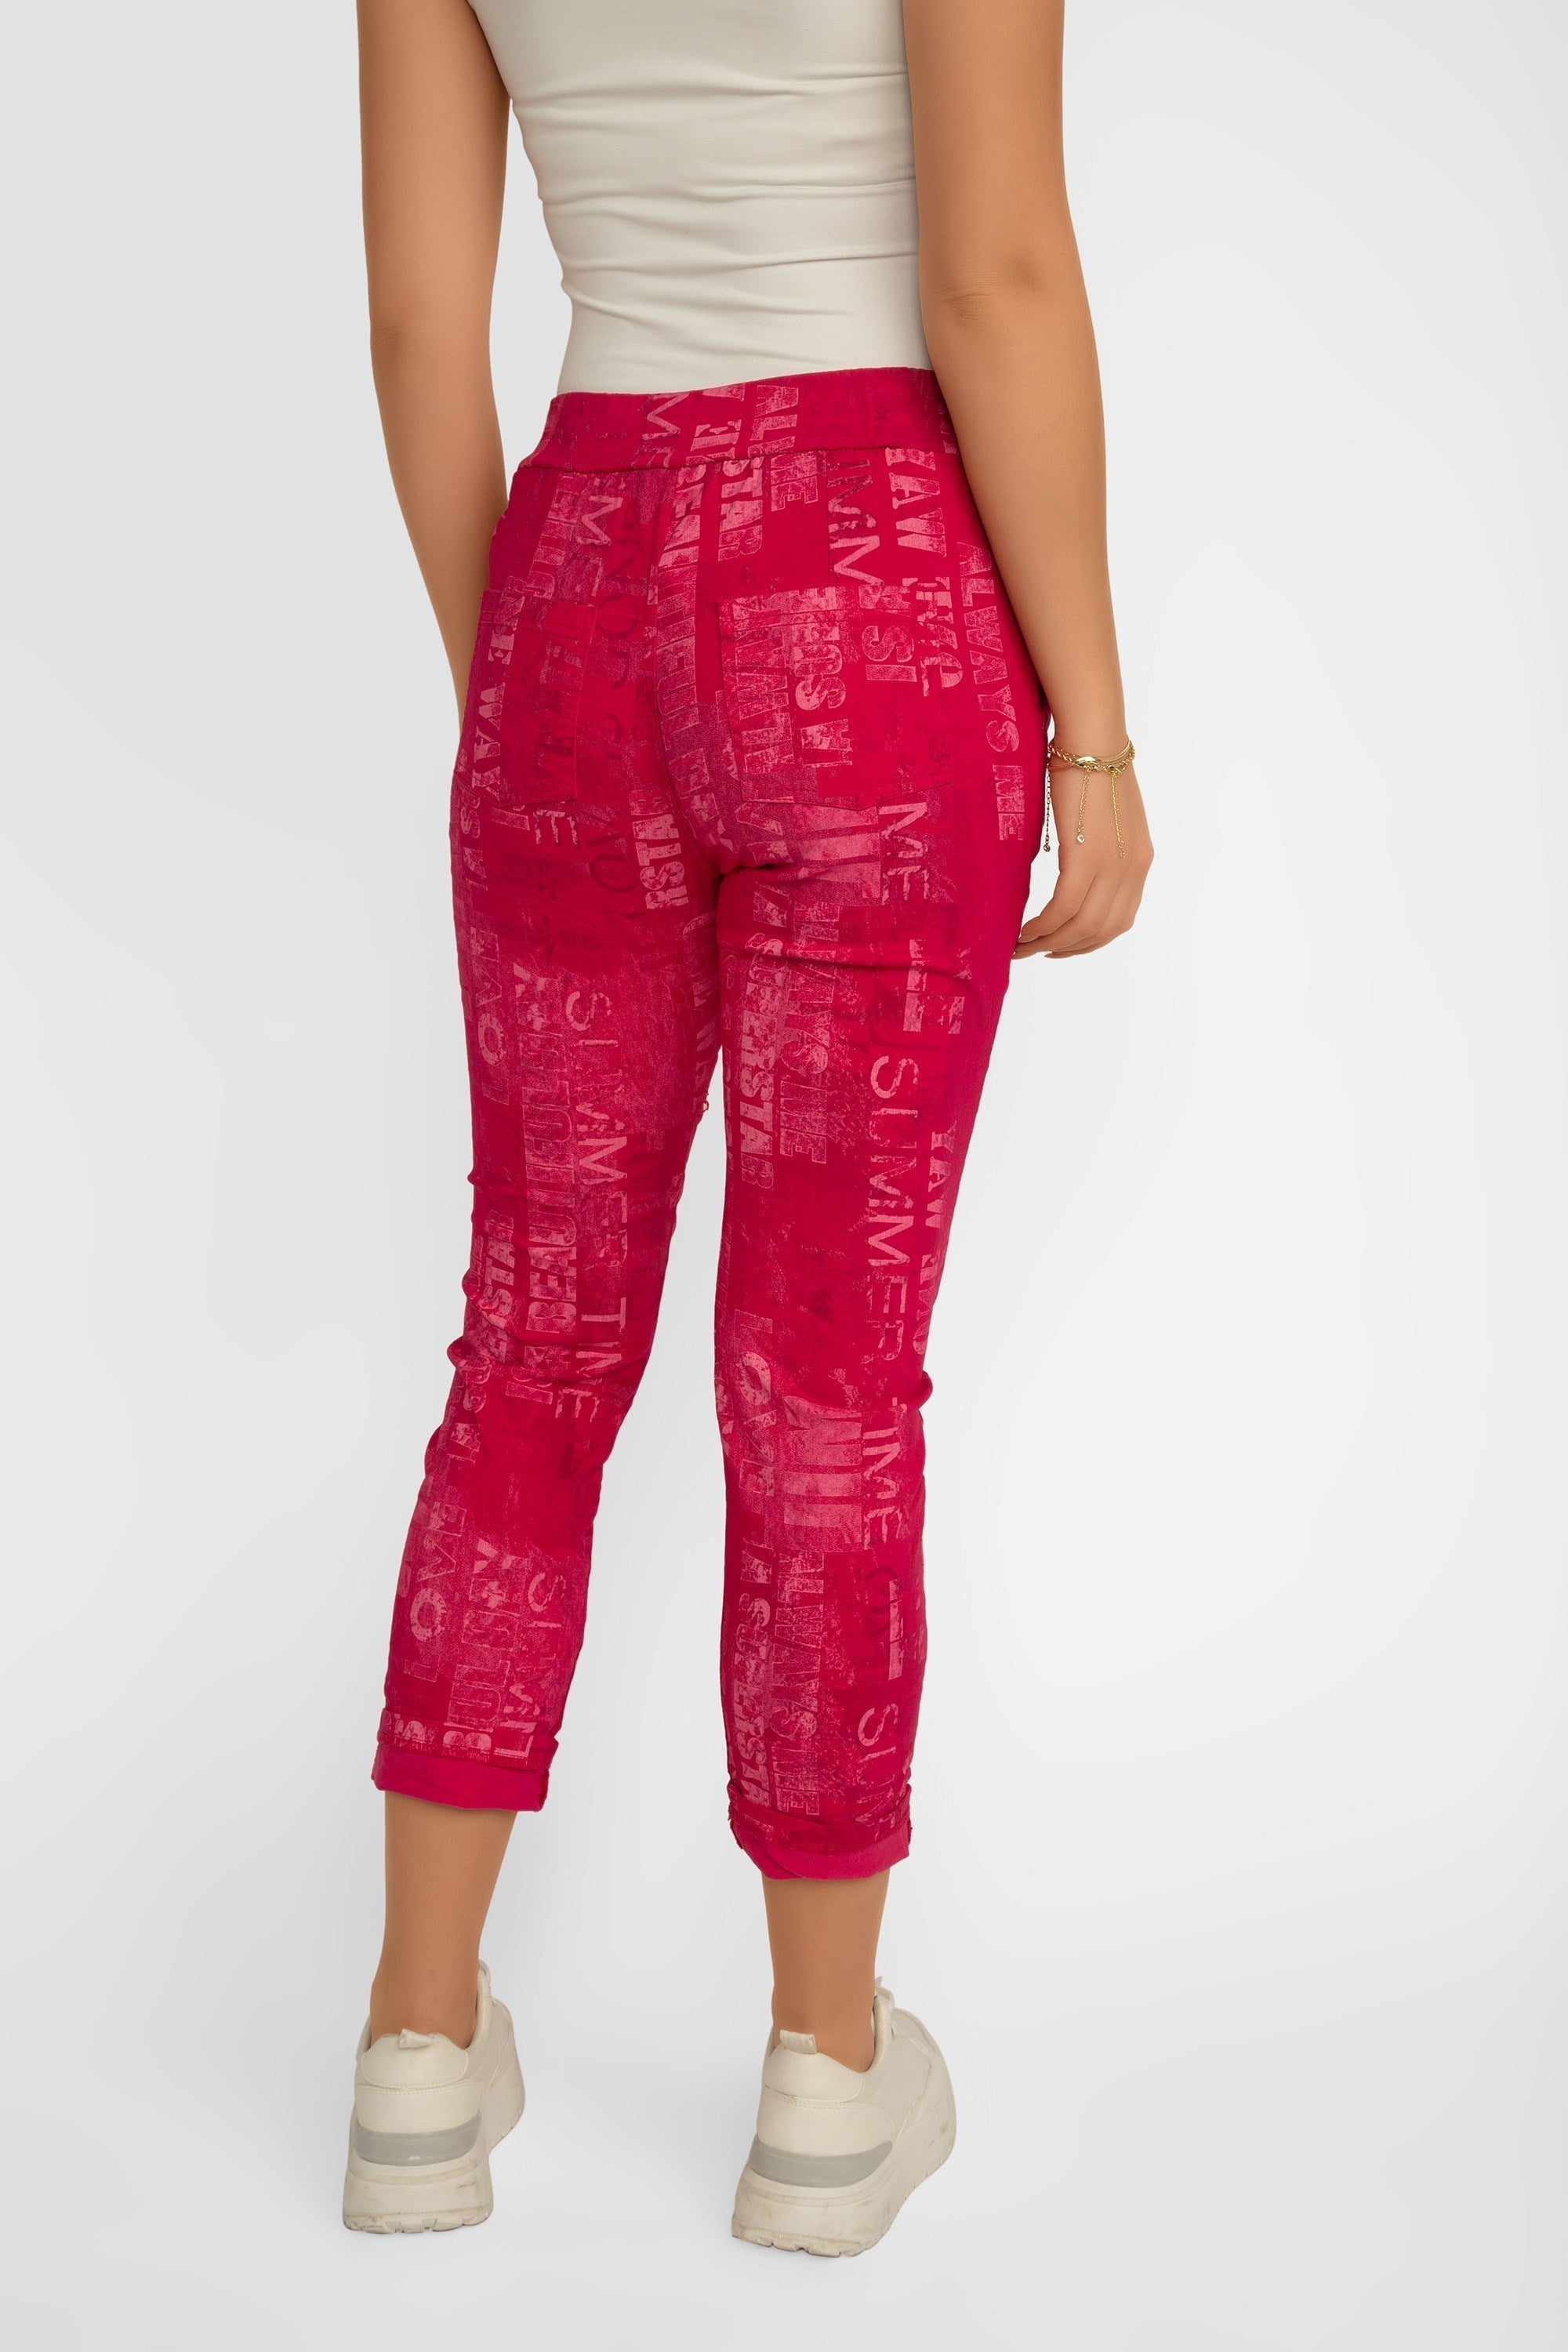 Back view of Elissia (L21026) Women's Pink Font Print Slim Fit, Cropped Crinkle Pants in Fuchsia